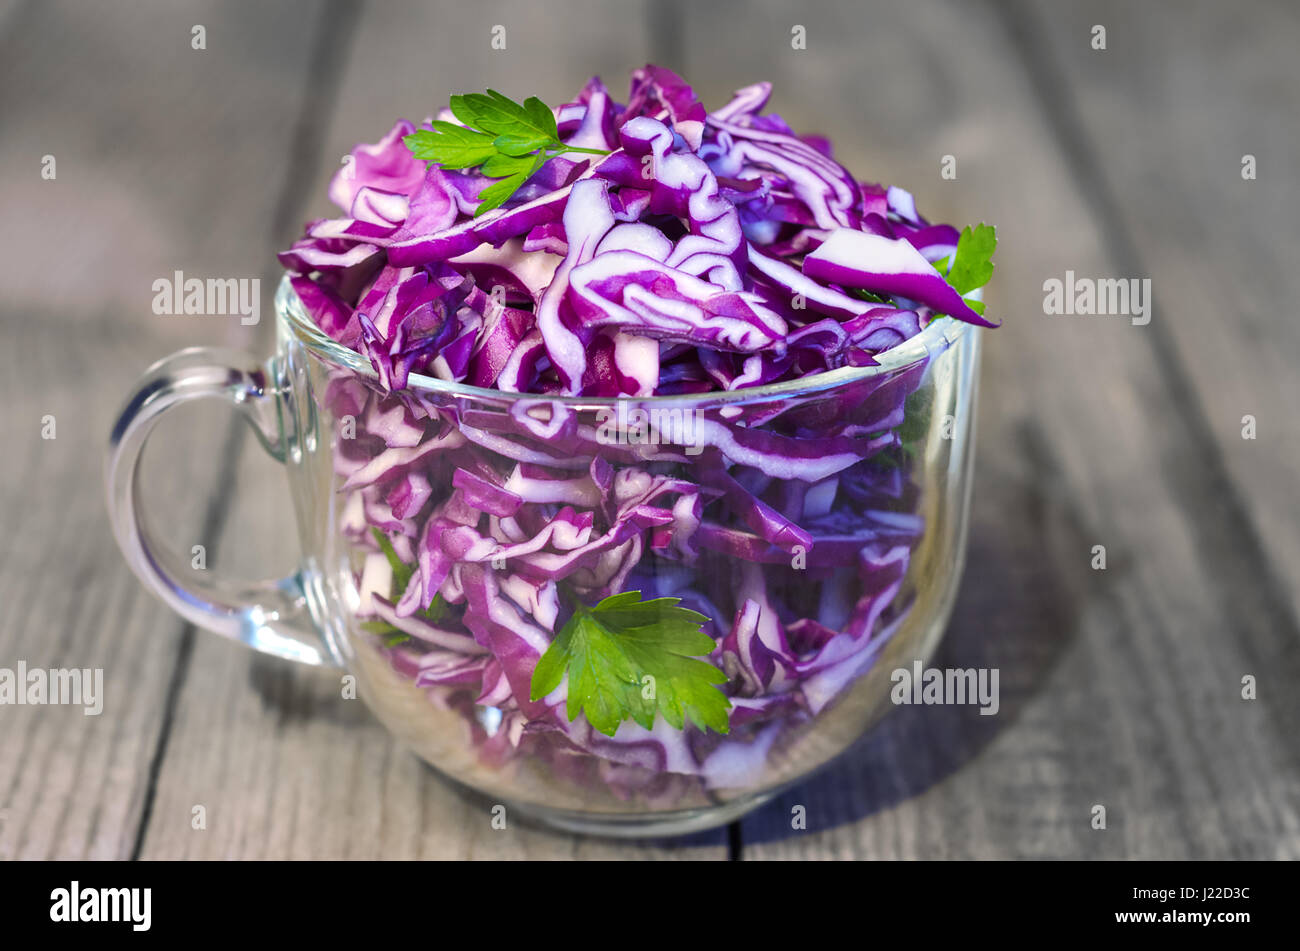 Salad of red cabbage. Wooden background, selective focus Stock Photo